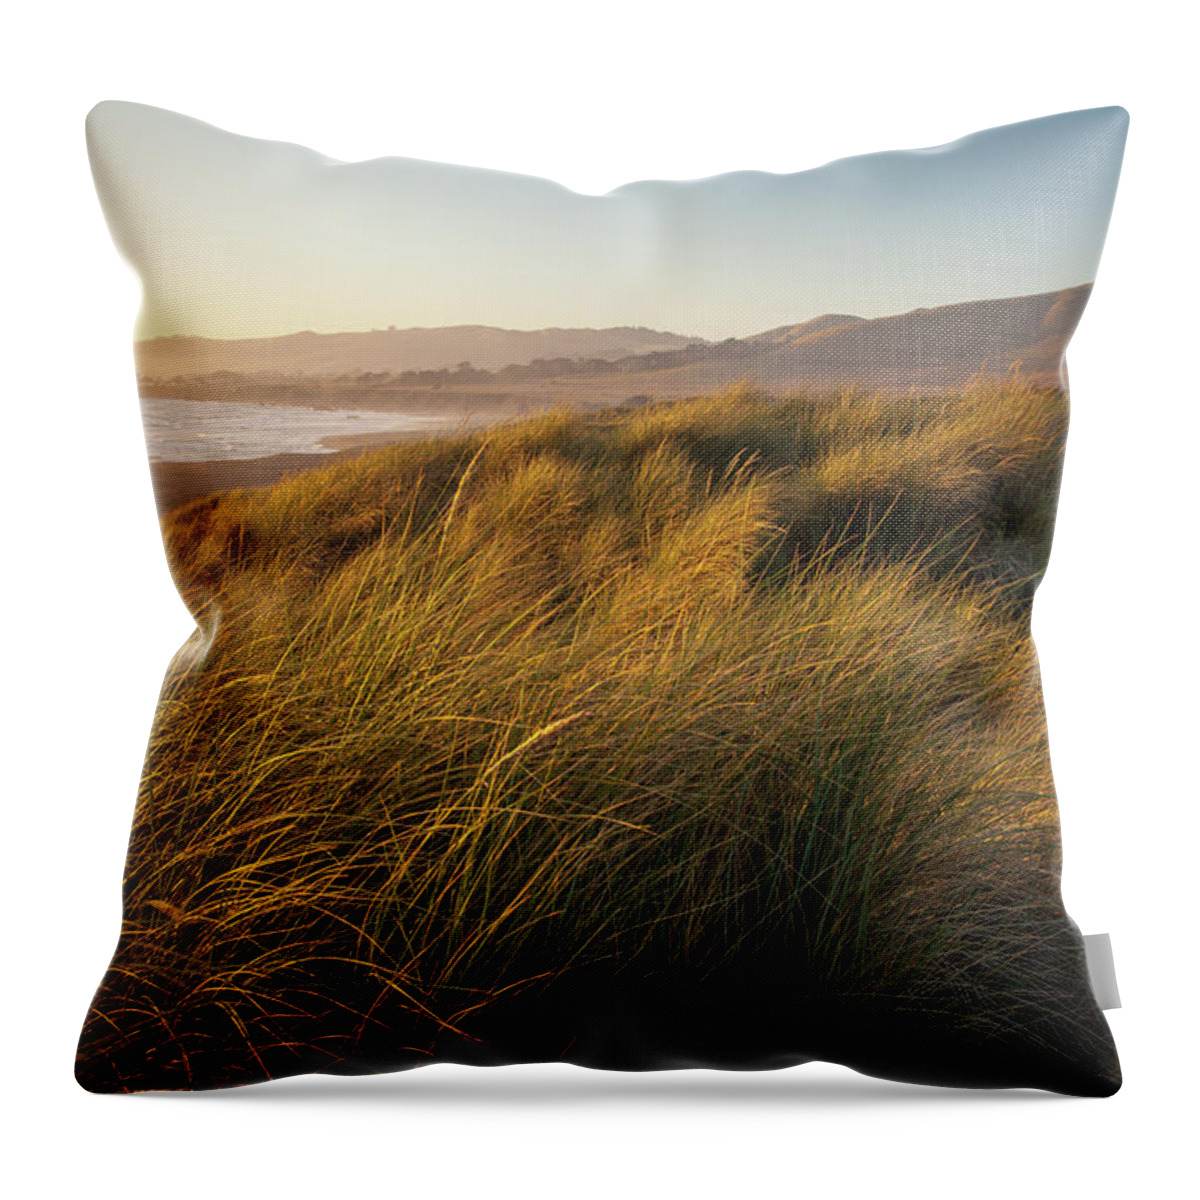 Tranquility Throw Pillow featuring the photograph Grass Covering Dunes By The Beach by Karen Desjardin